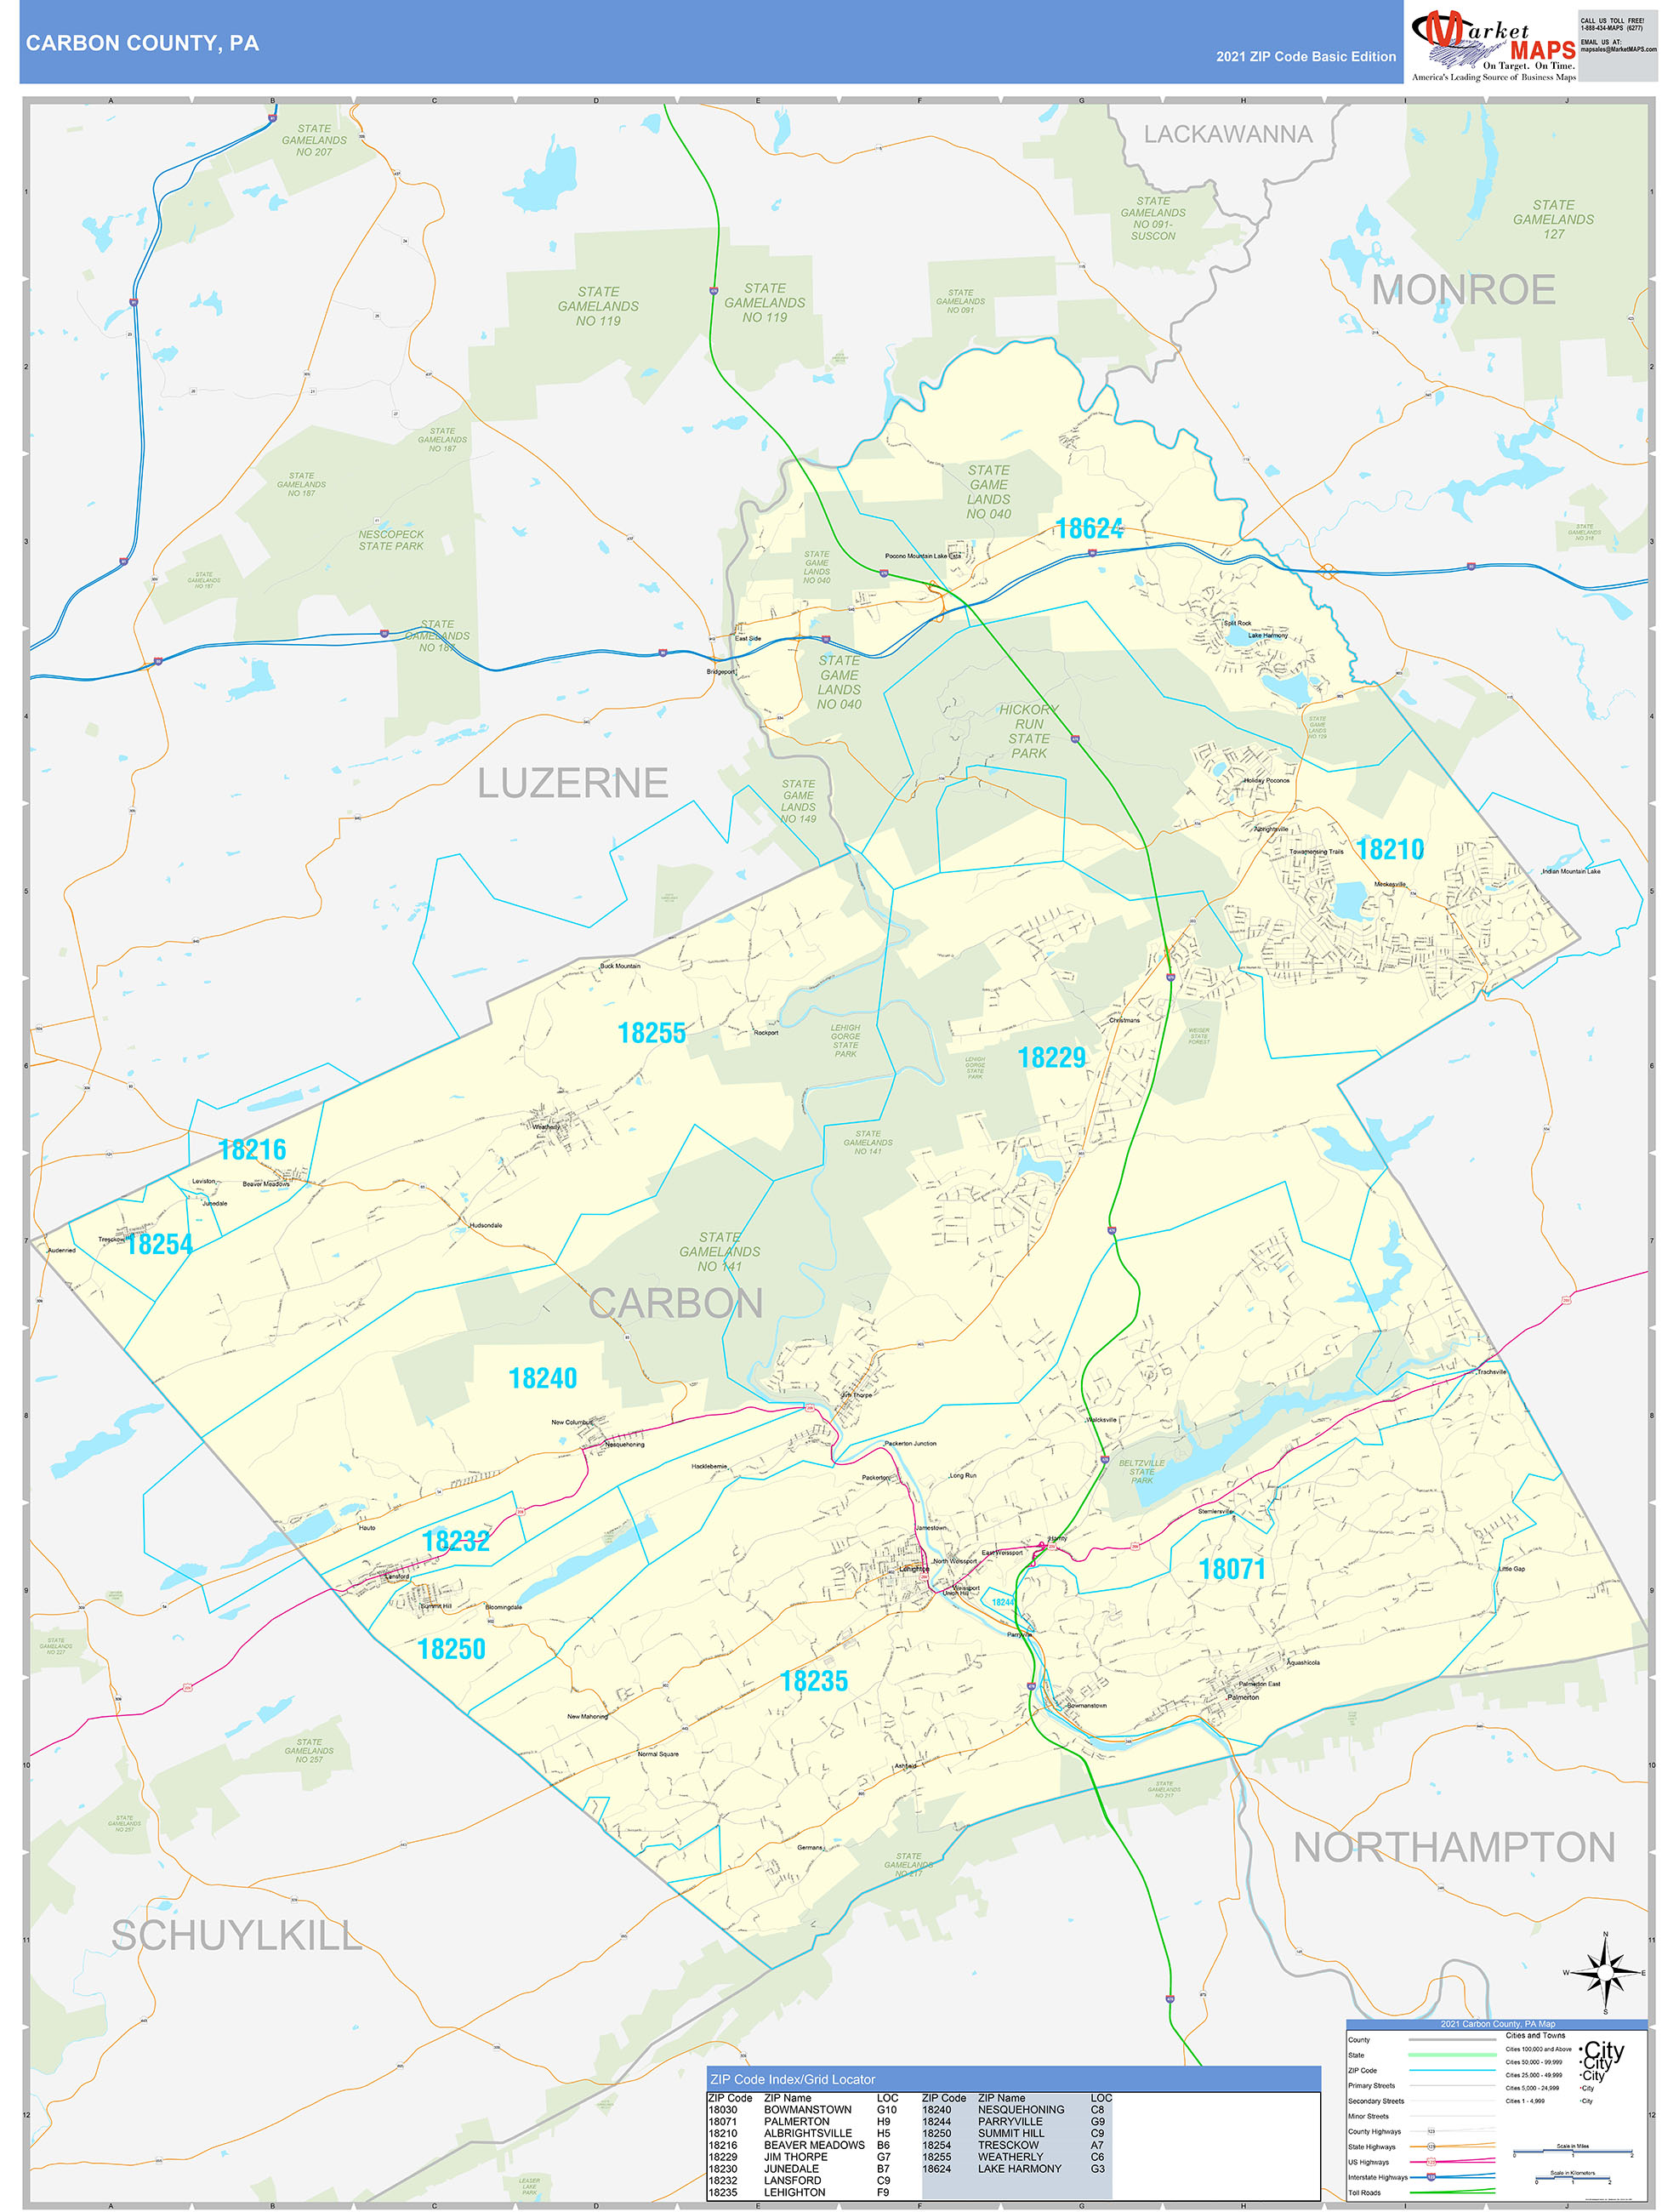 Carbon County, PA Zip Code Wall Map Basic Style by MarketMAPS MapSales